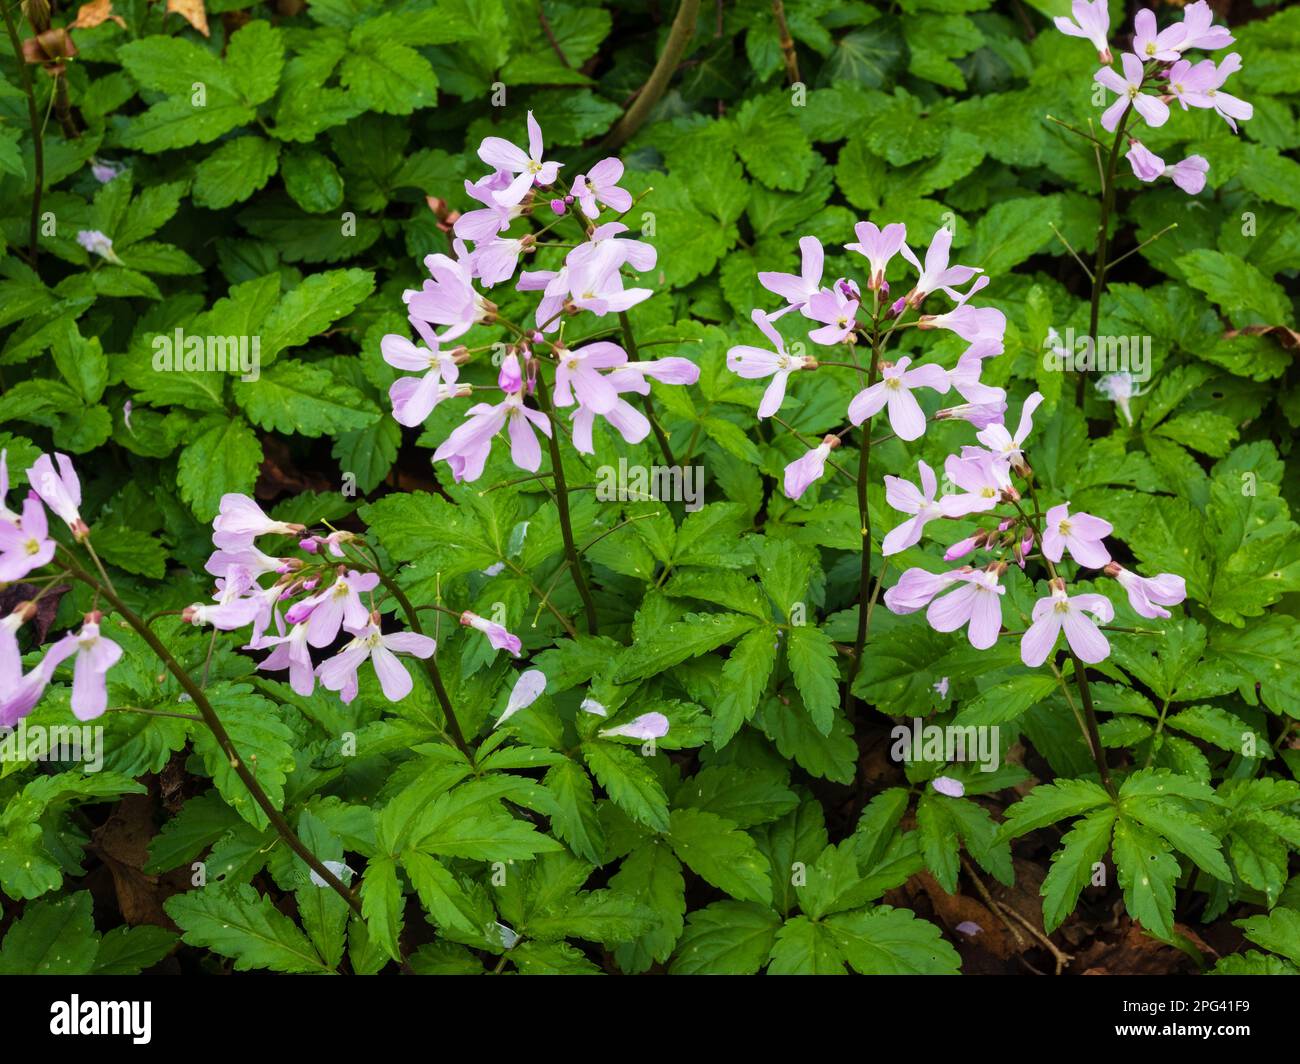 Delicate soft pink early spring flowers of the perennial woodland plant, Cardamine quinquefolia, five leaved cuckoo flower Stock Photo